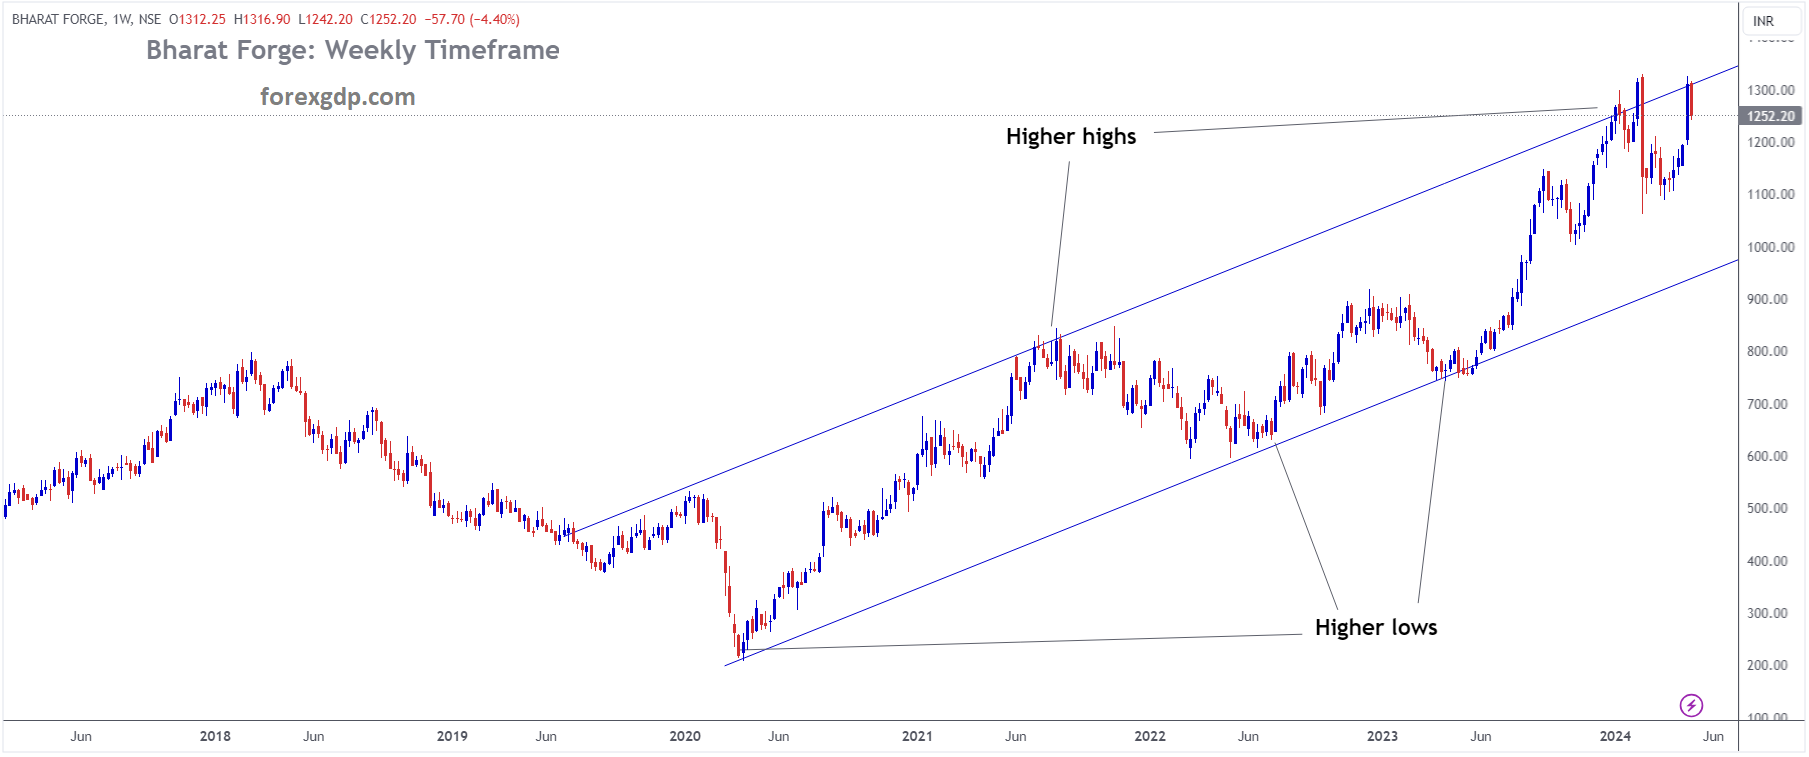 BHARAT FORGE Market Price is moving in Ascending channel and market has reached higher high area of the channel